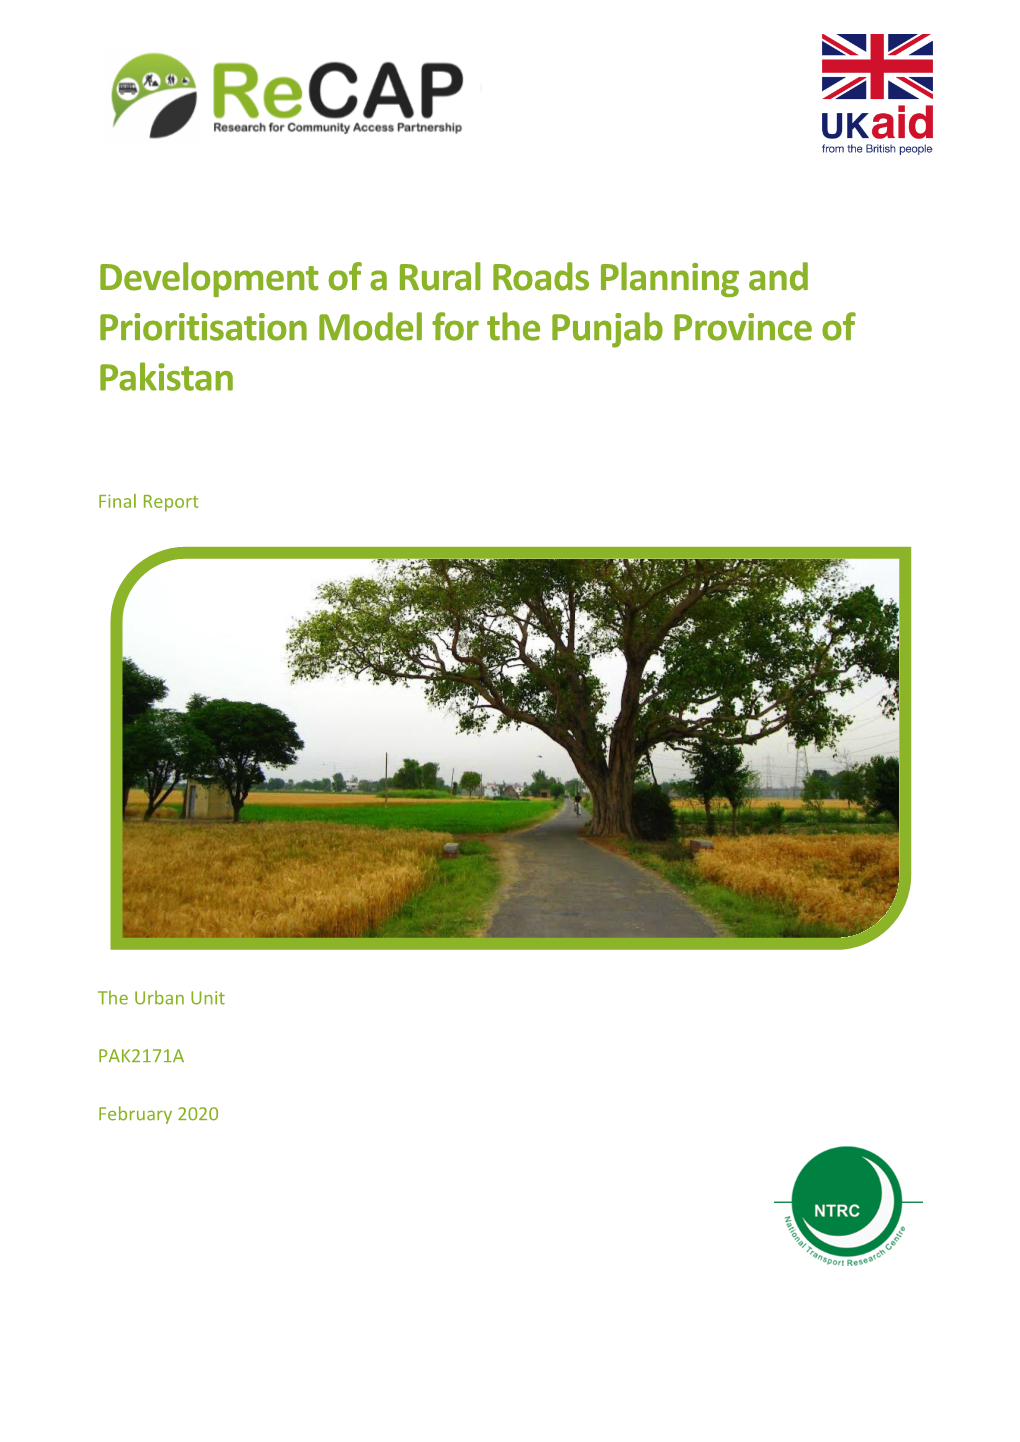 Development of a Rural Roads Planning and Prioritisation Model for the Punjab Province of Pakistan